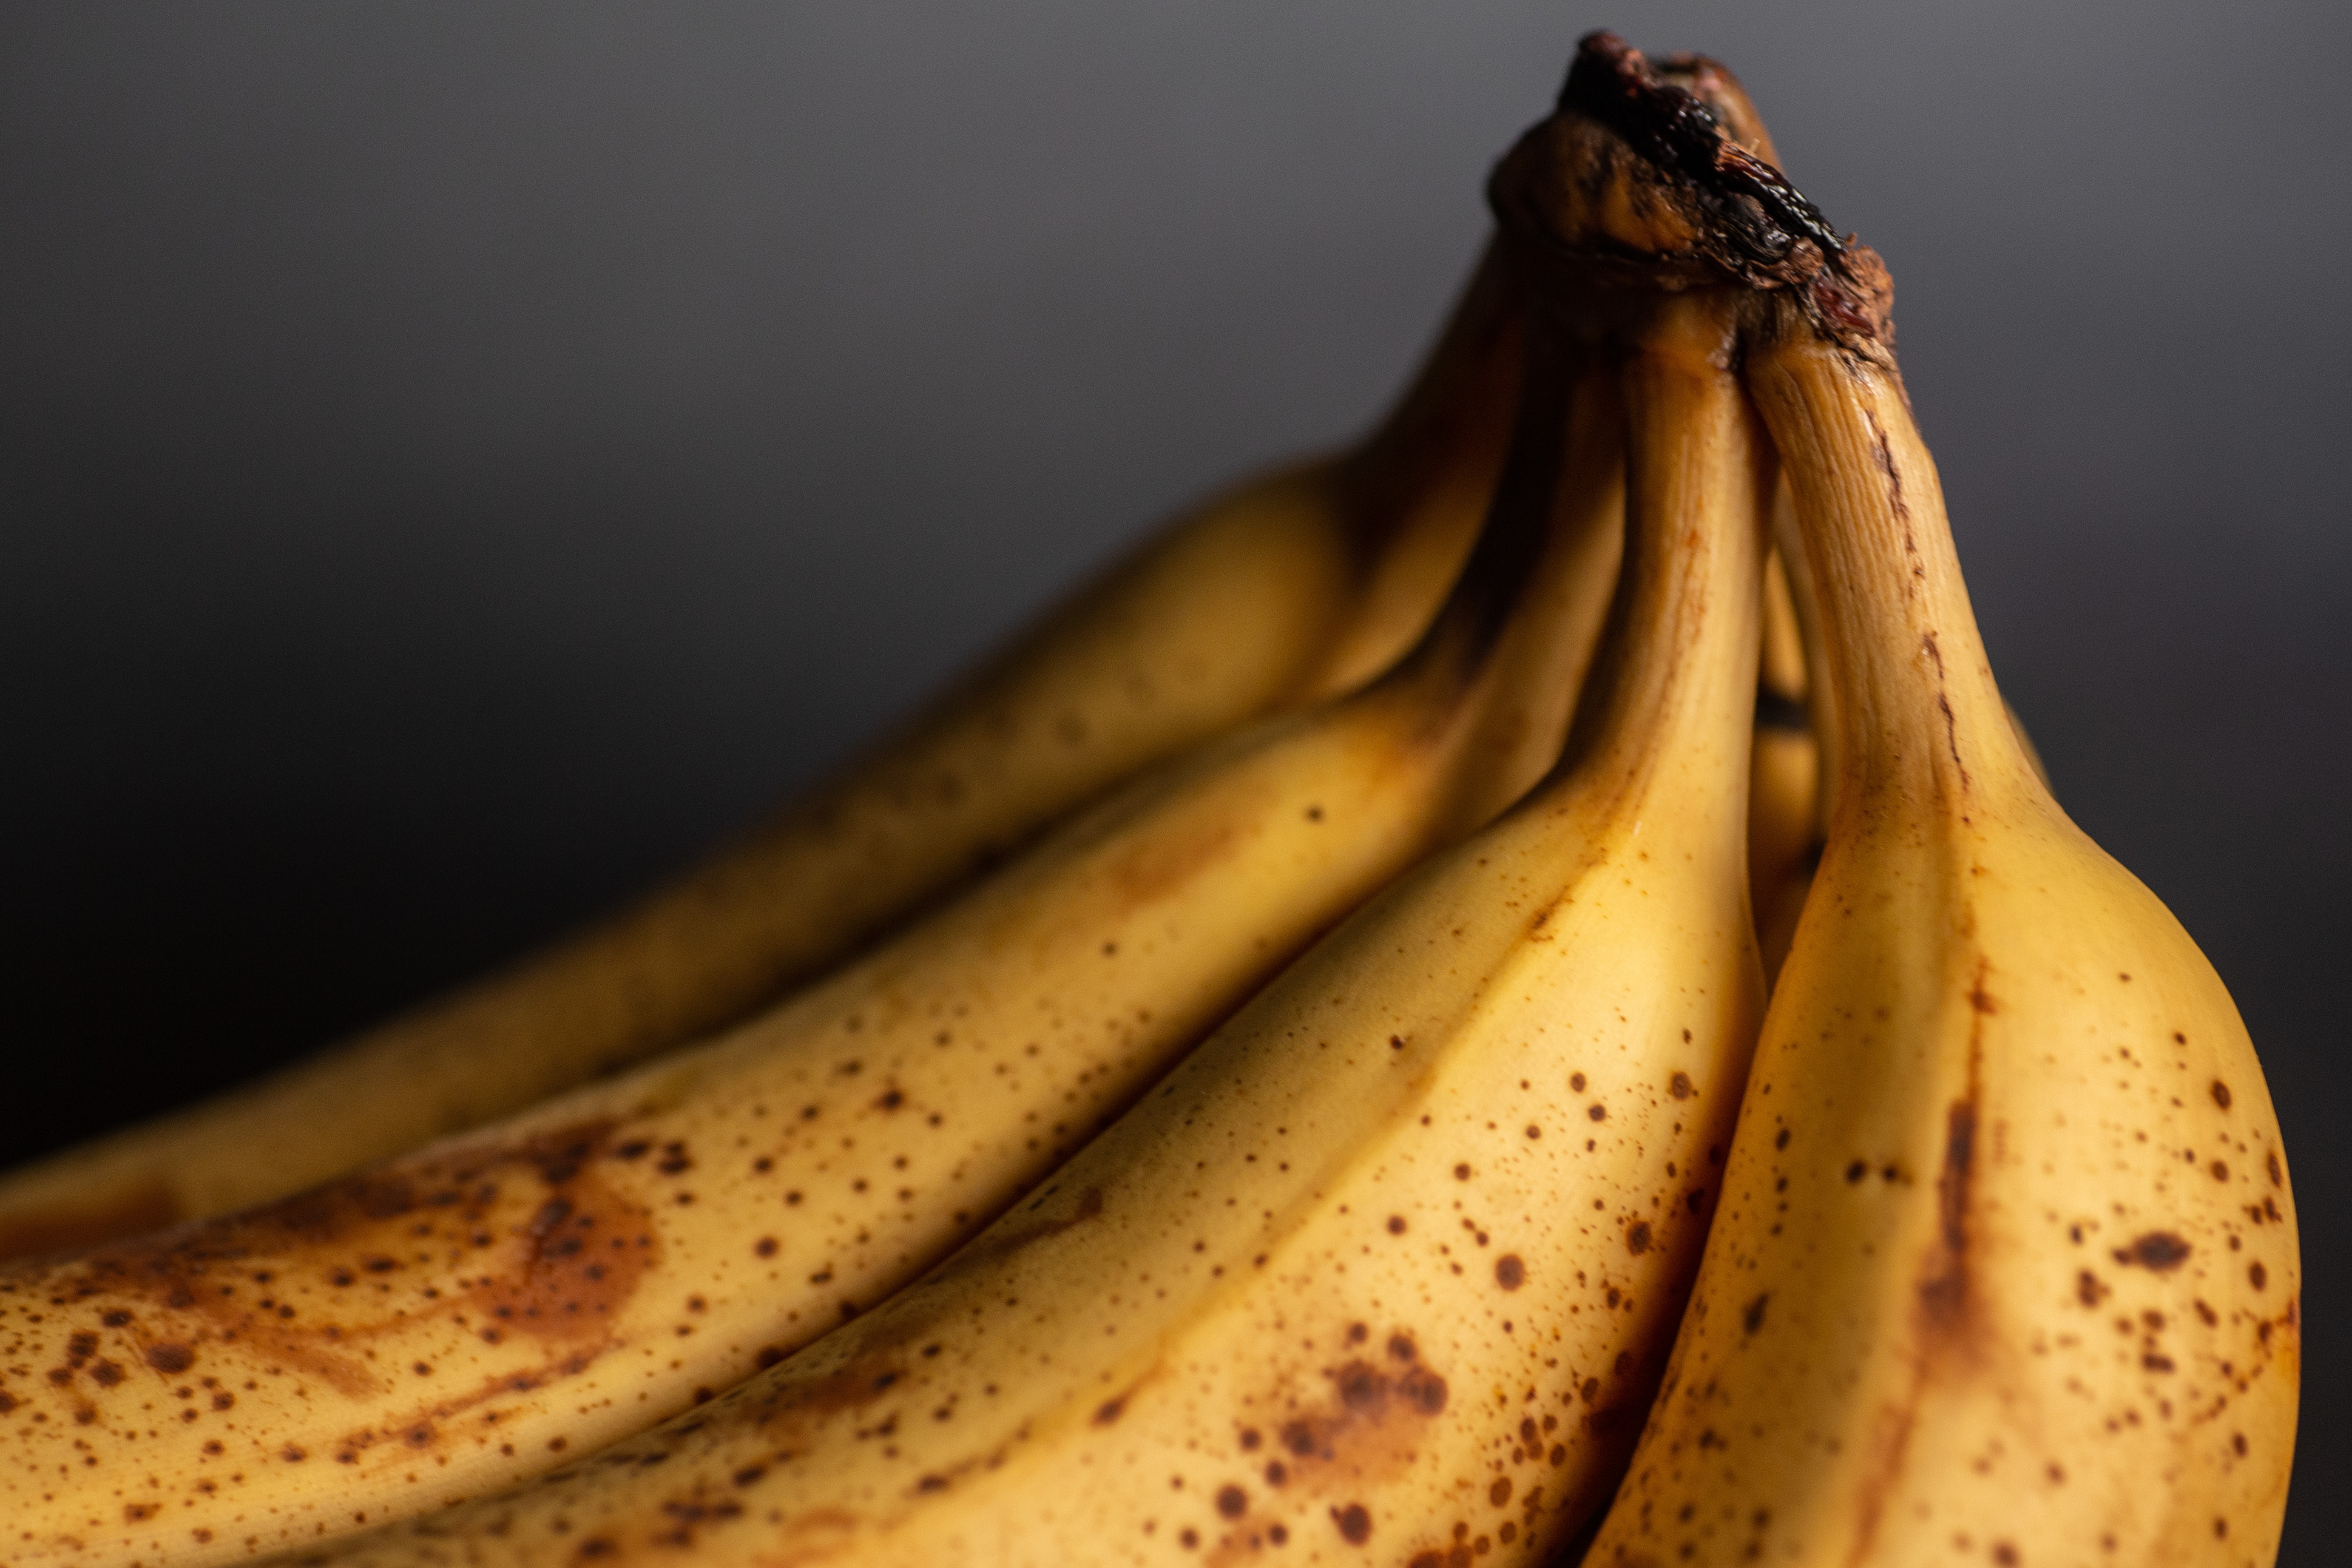 Check These 10 Surprising Health Benefits Of Eating 3 Bananas a Day!